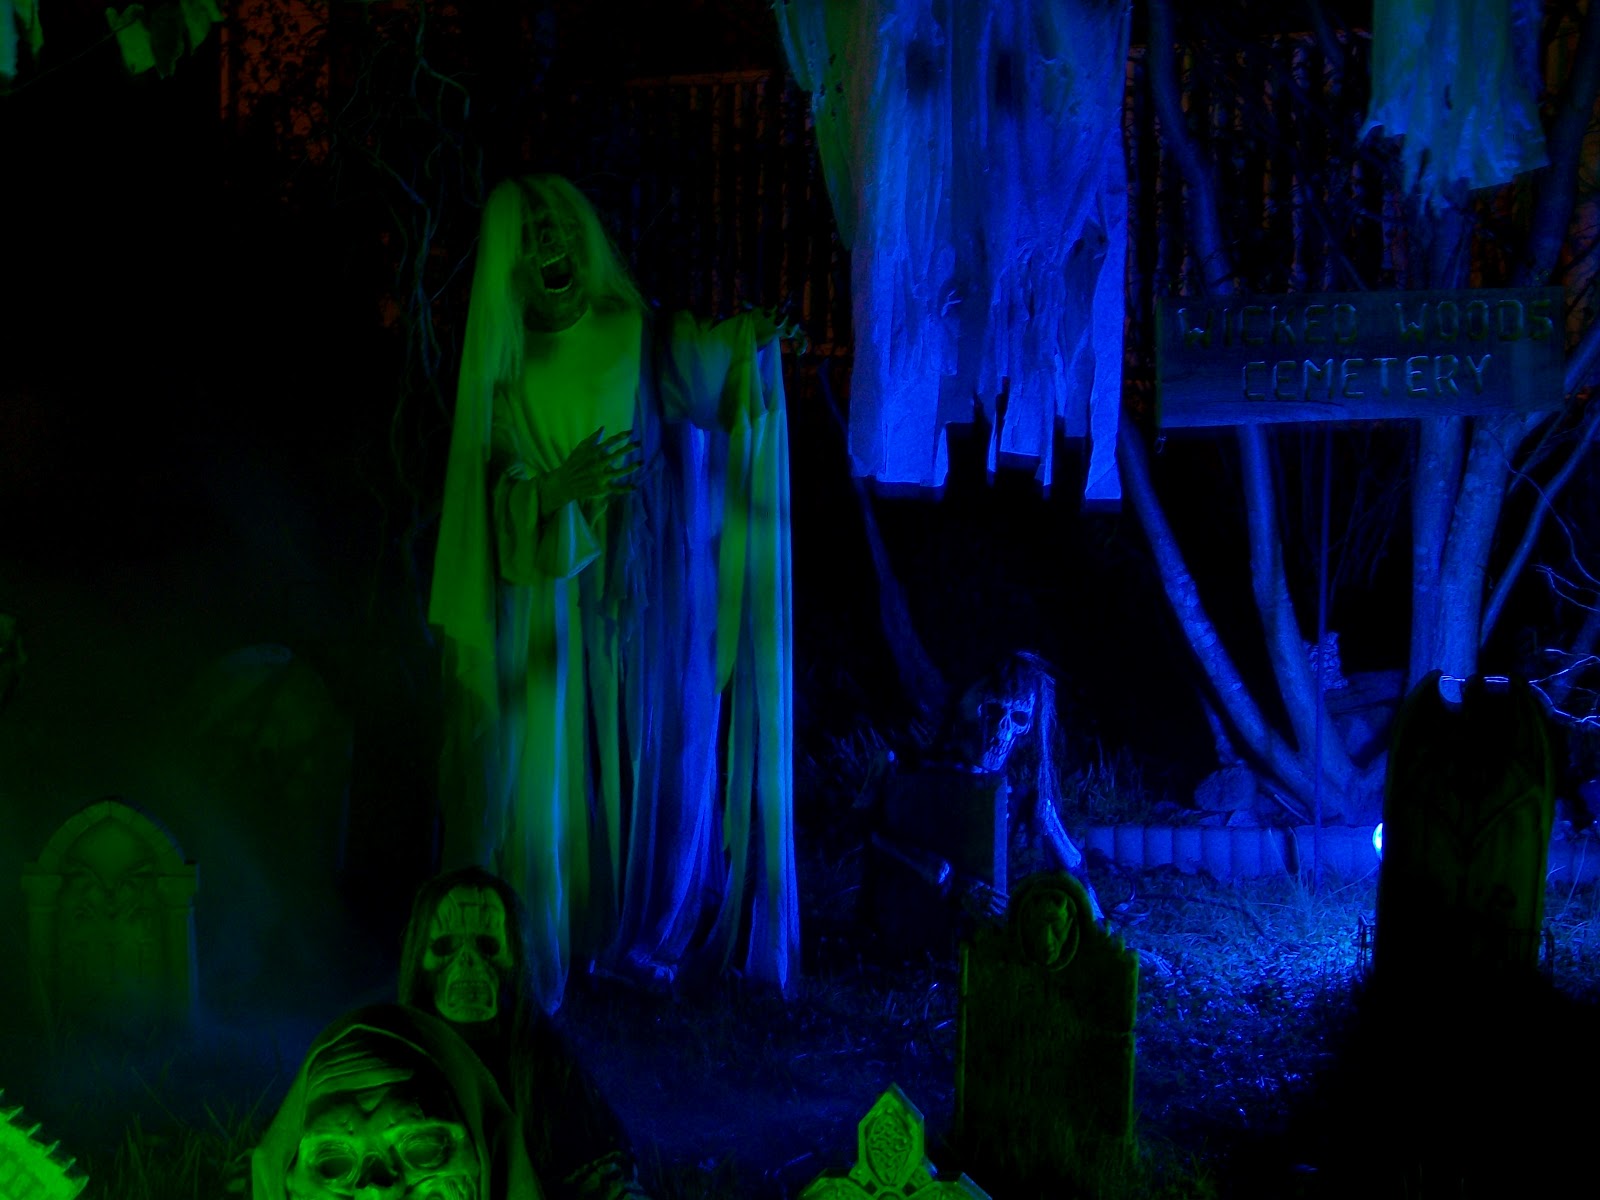 Something wicKED this way comes....: A wicKED opinion on yard haunt ...